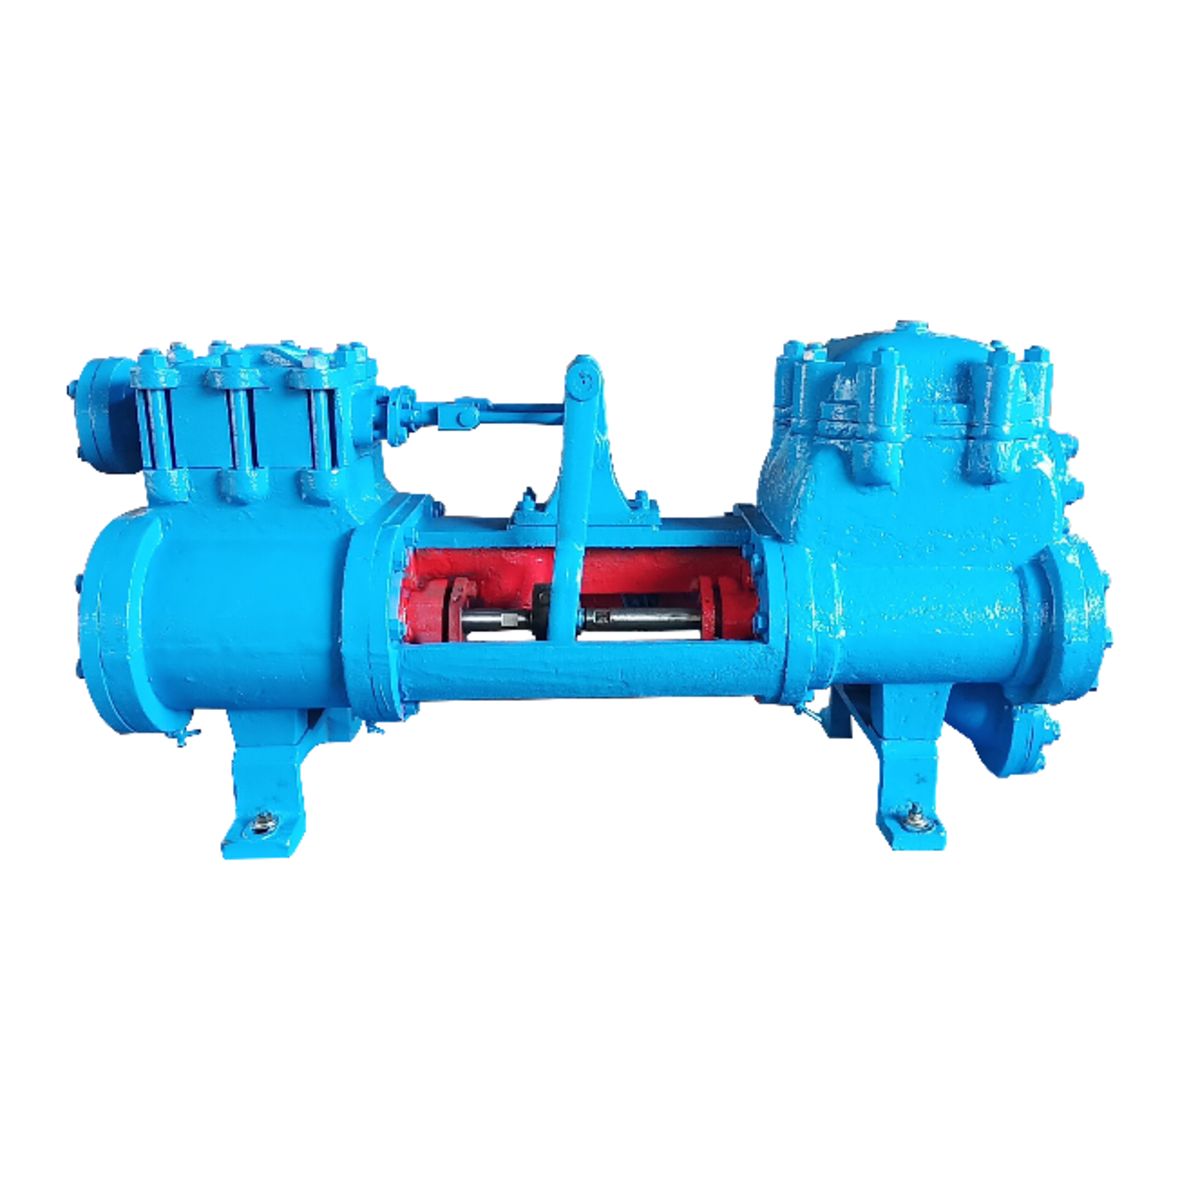 Structure characteristics and introduction of quality 2QS Steam Reciprocating Pump